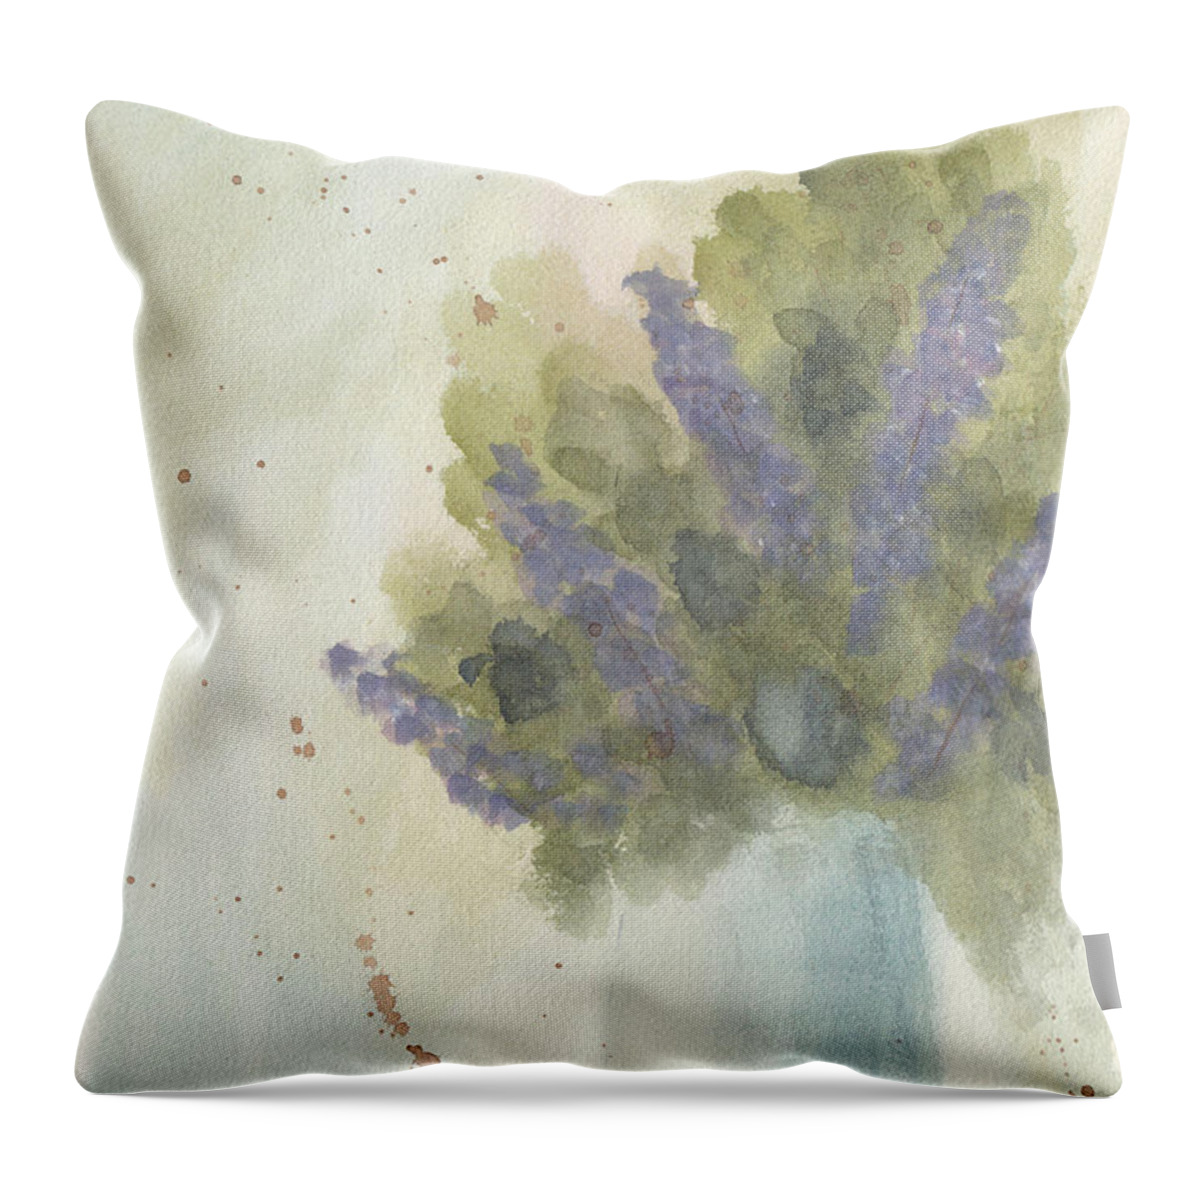 Lilac Throw Pillow featuring the painting Lilacs by Ken Powers